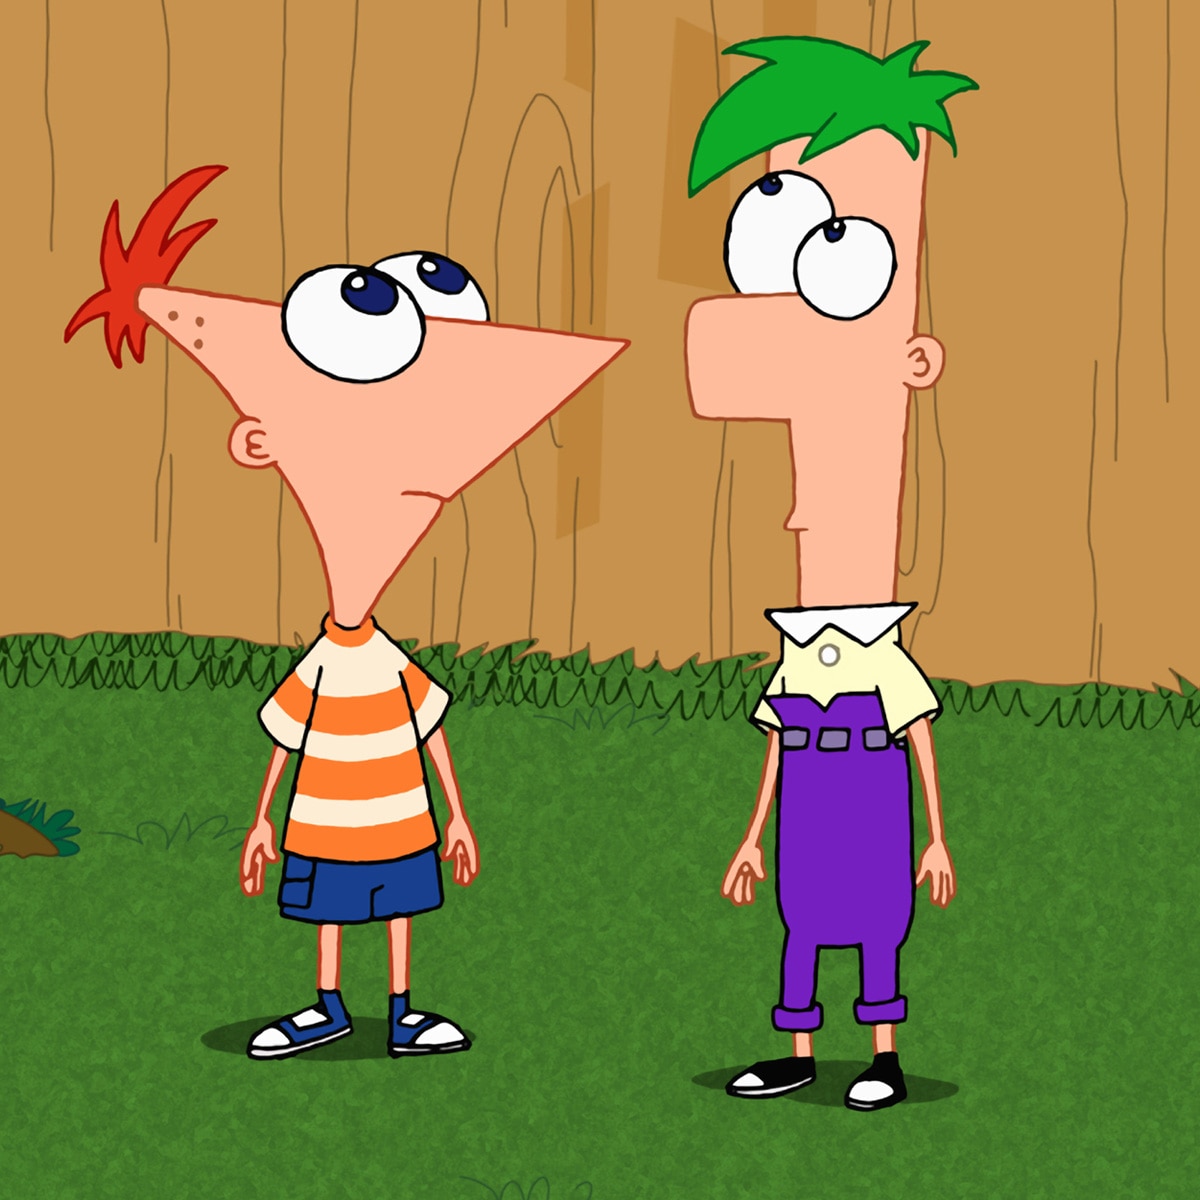 brendan pritchard recommends Pictures Of Phineas And Ferb